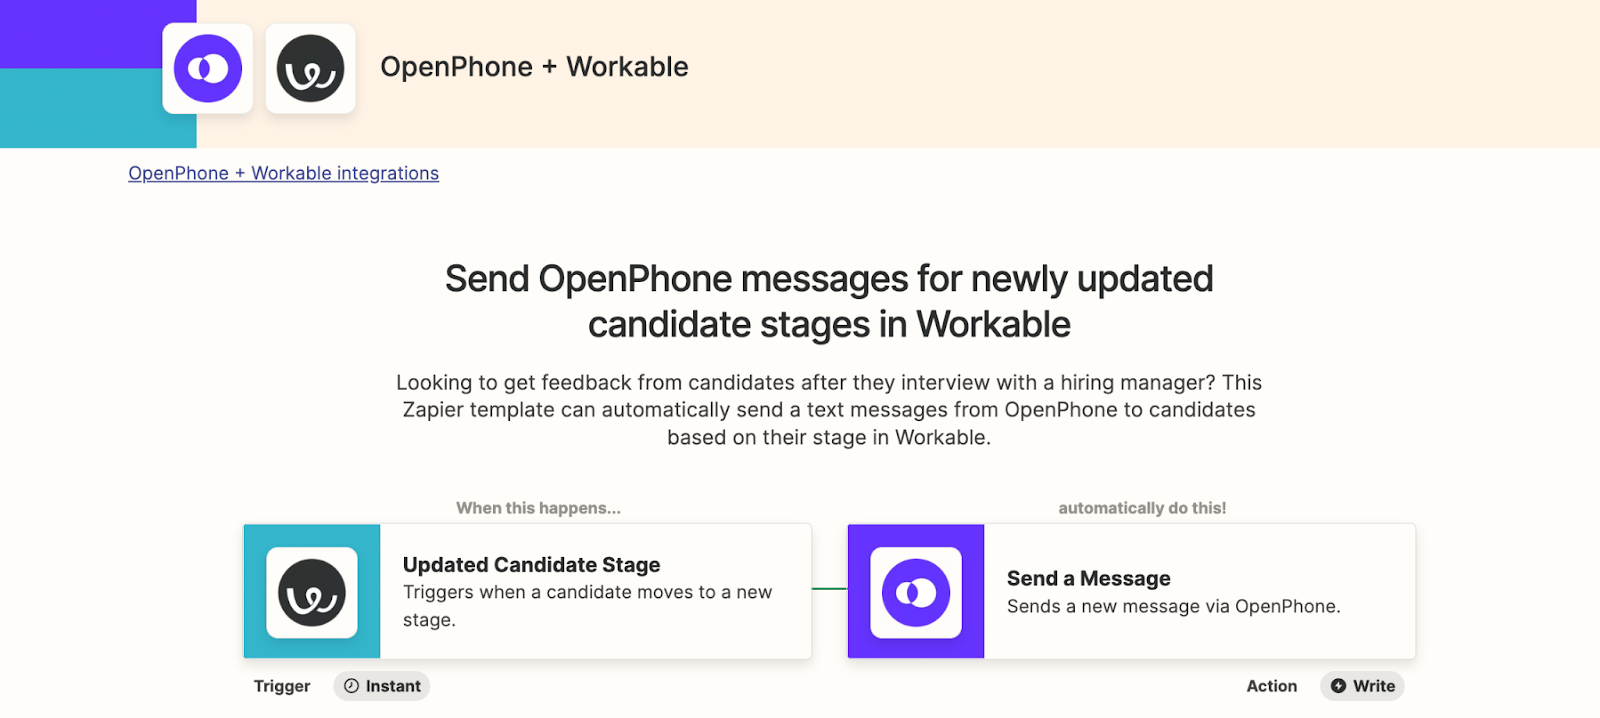 Zap that connects OpenPhone and Workable to send a text automatically after a completed interview